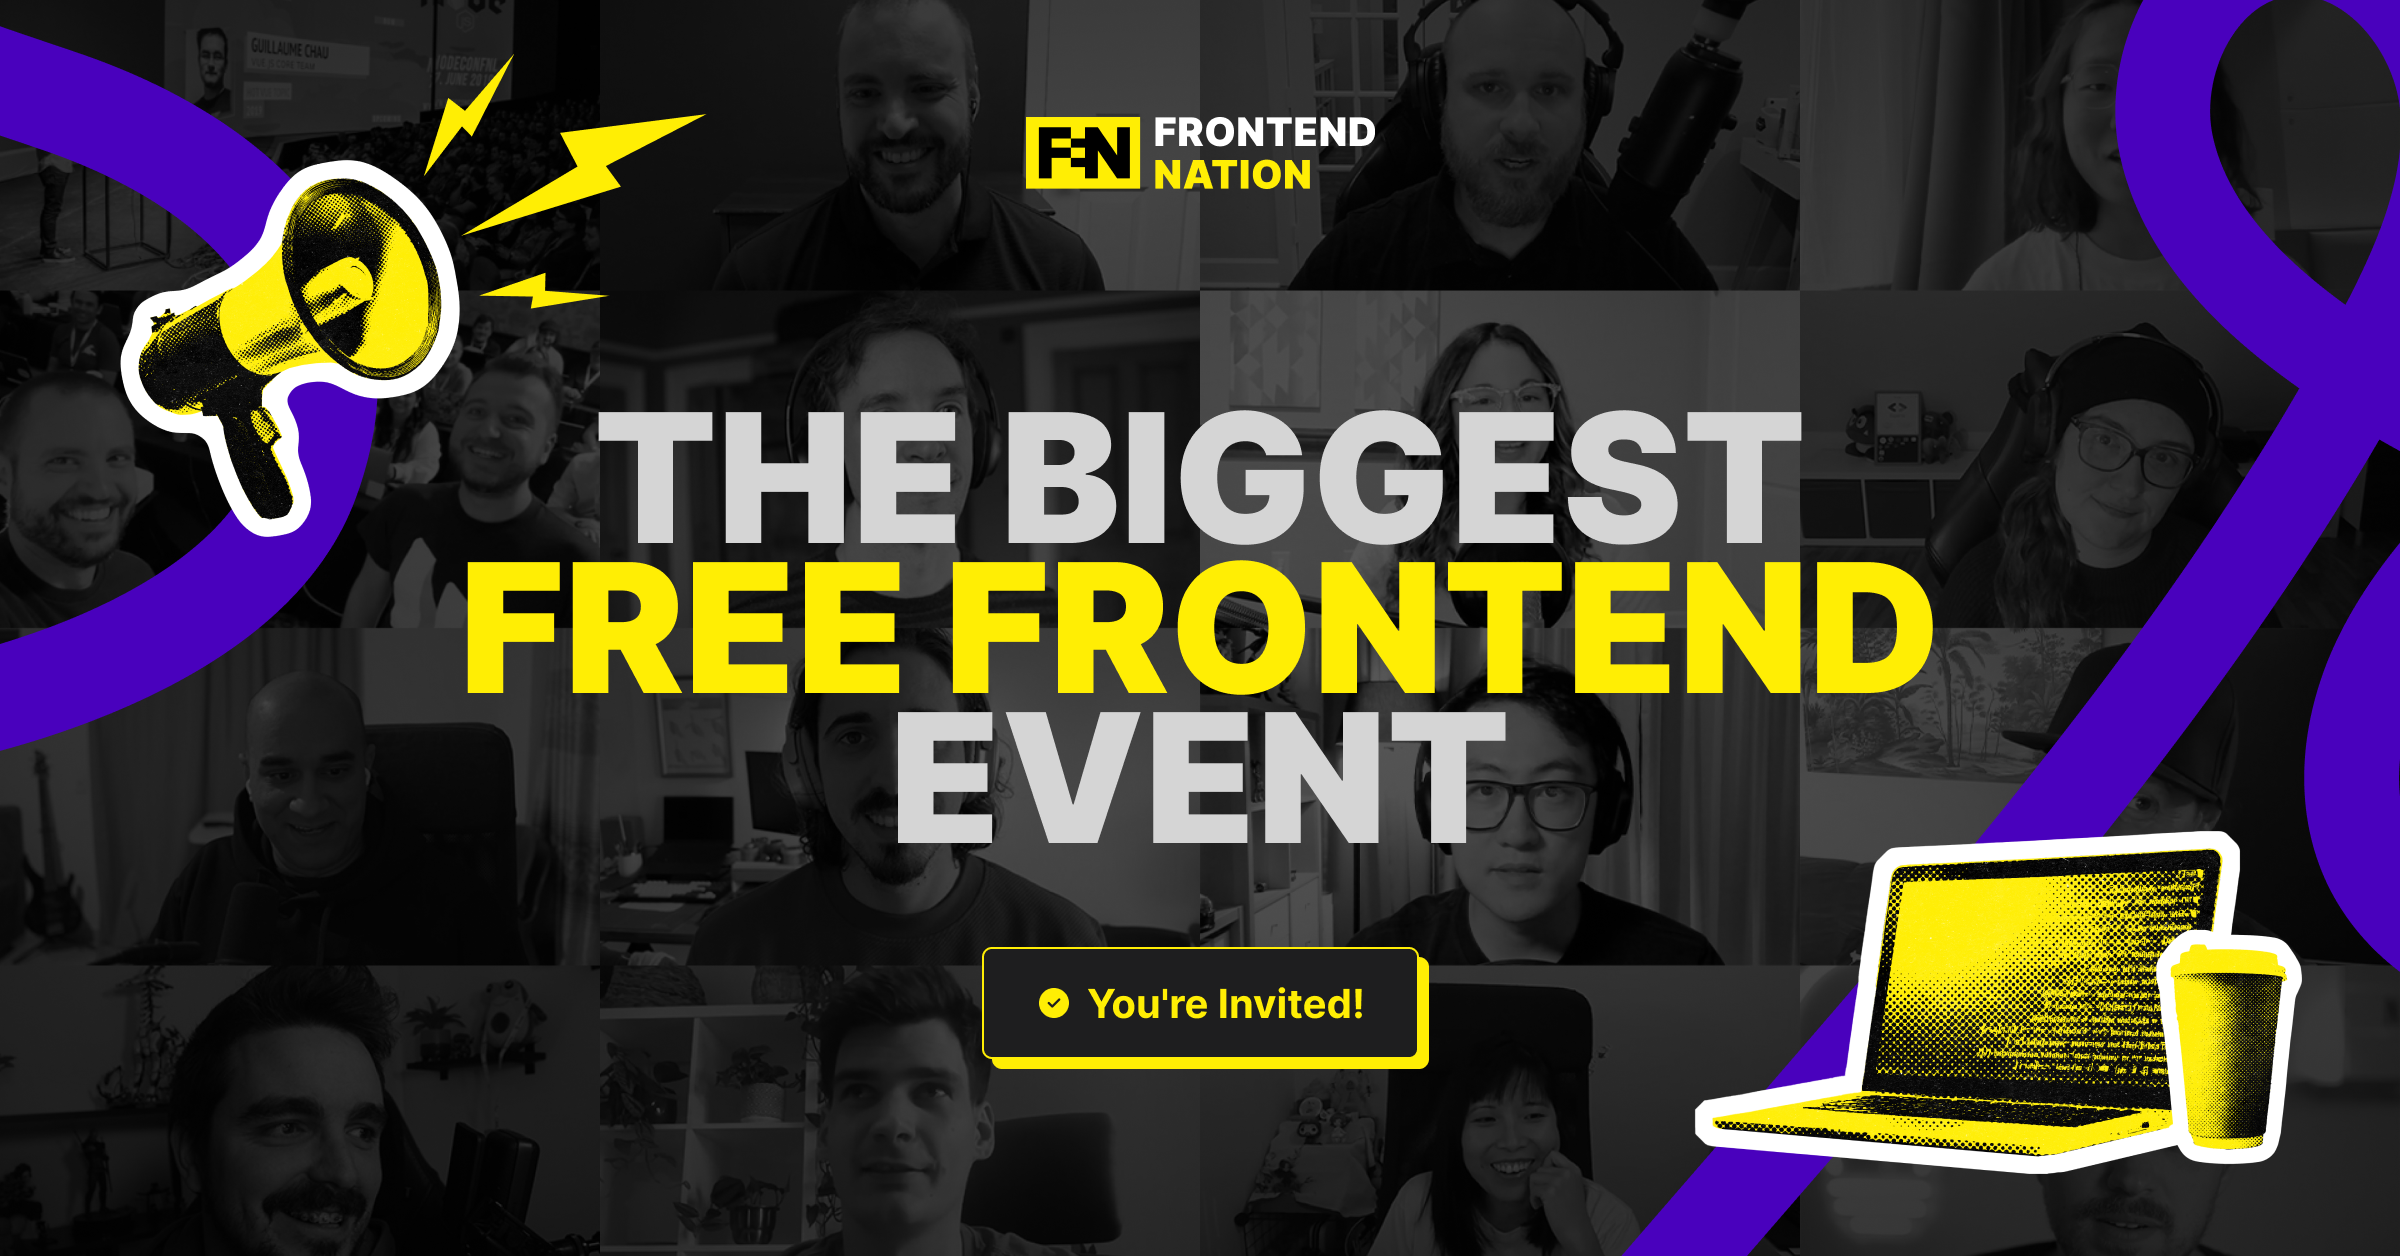 Frontend Nation: The Biggest Free Frontend Event (You're Invited!)